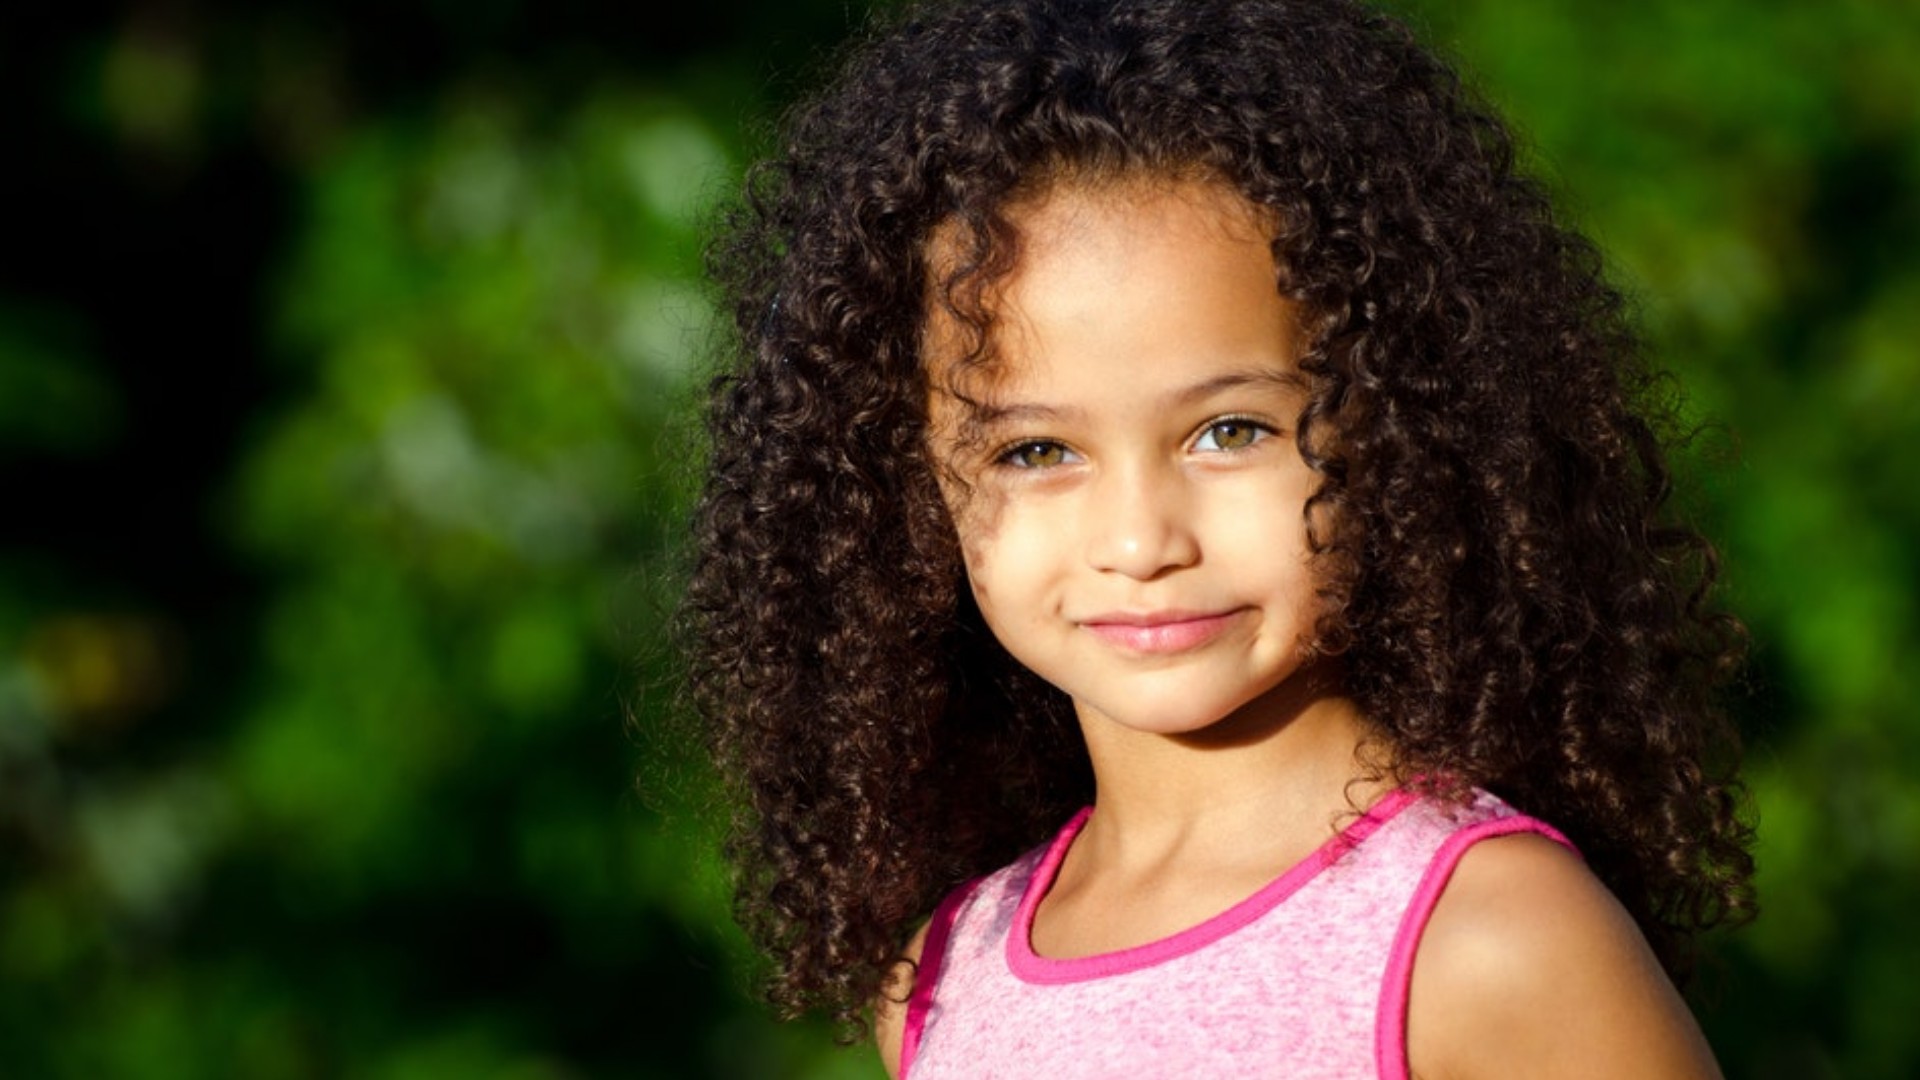 6. "Blonde Hair Genetics in Mixed Babies" - Explained - wide 3